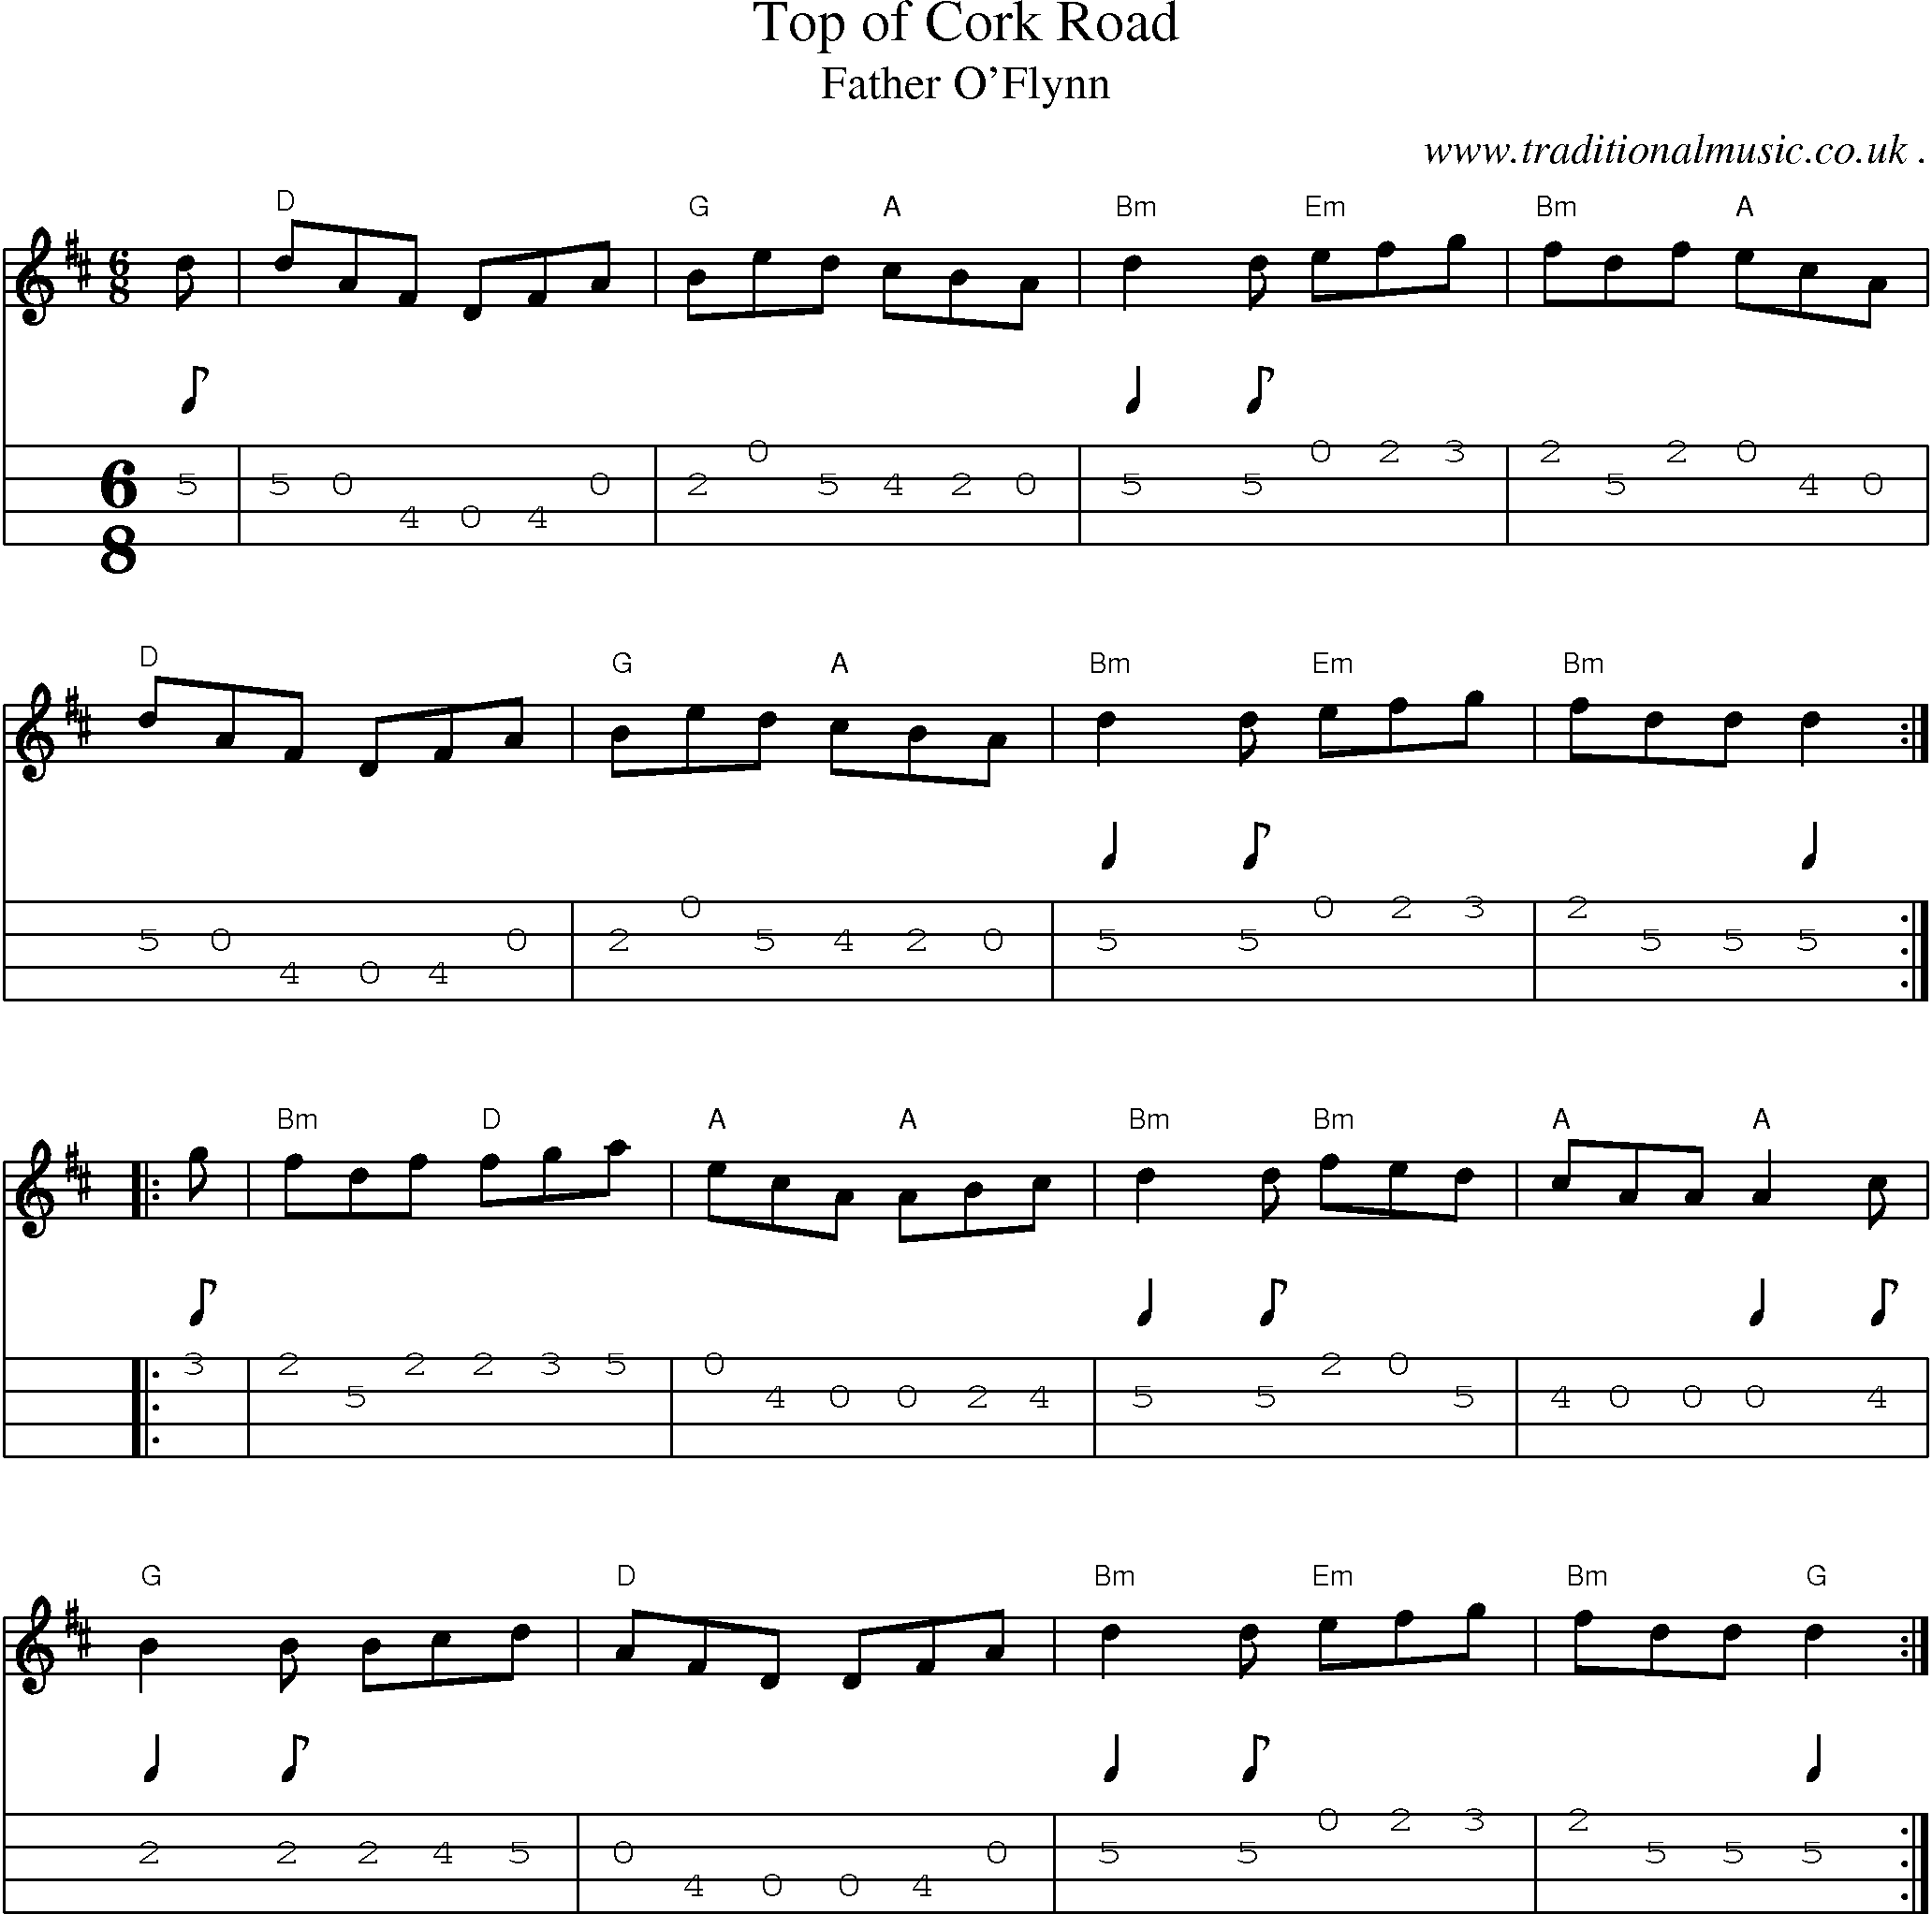 Music Score and Guitar Tabs for Top Of Cork Road